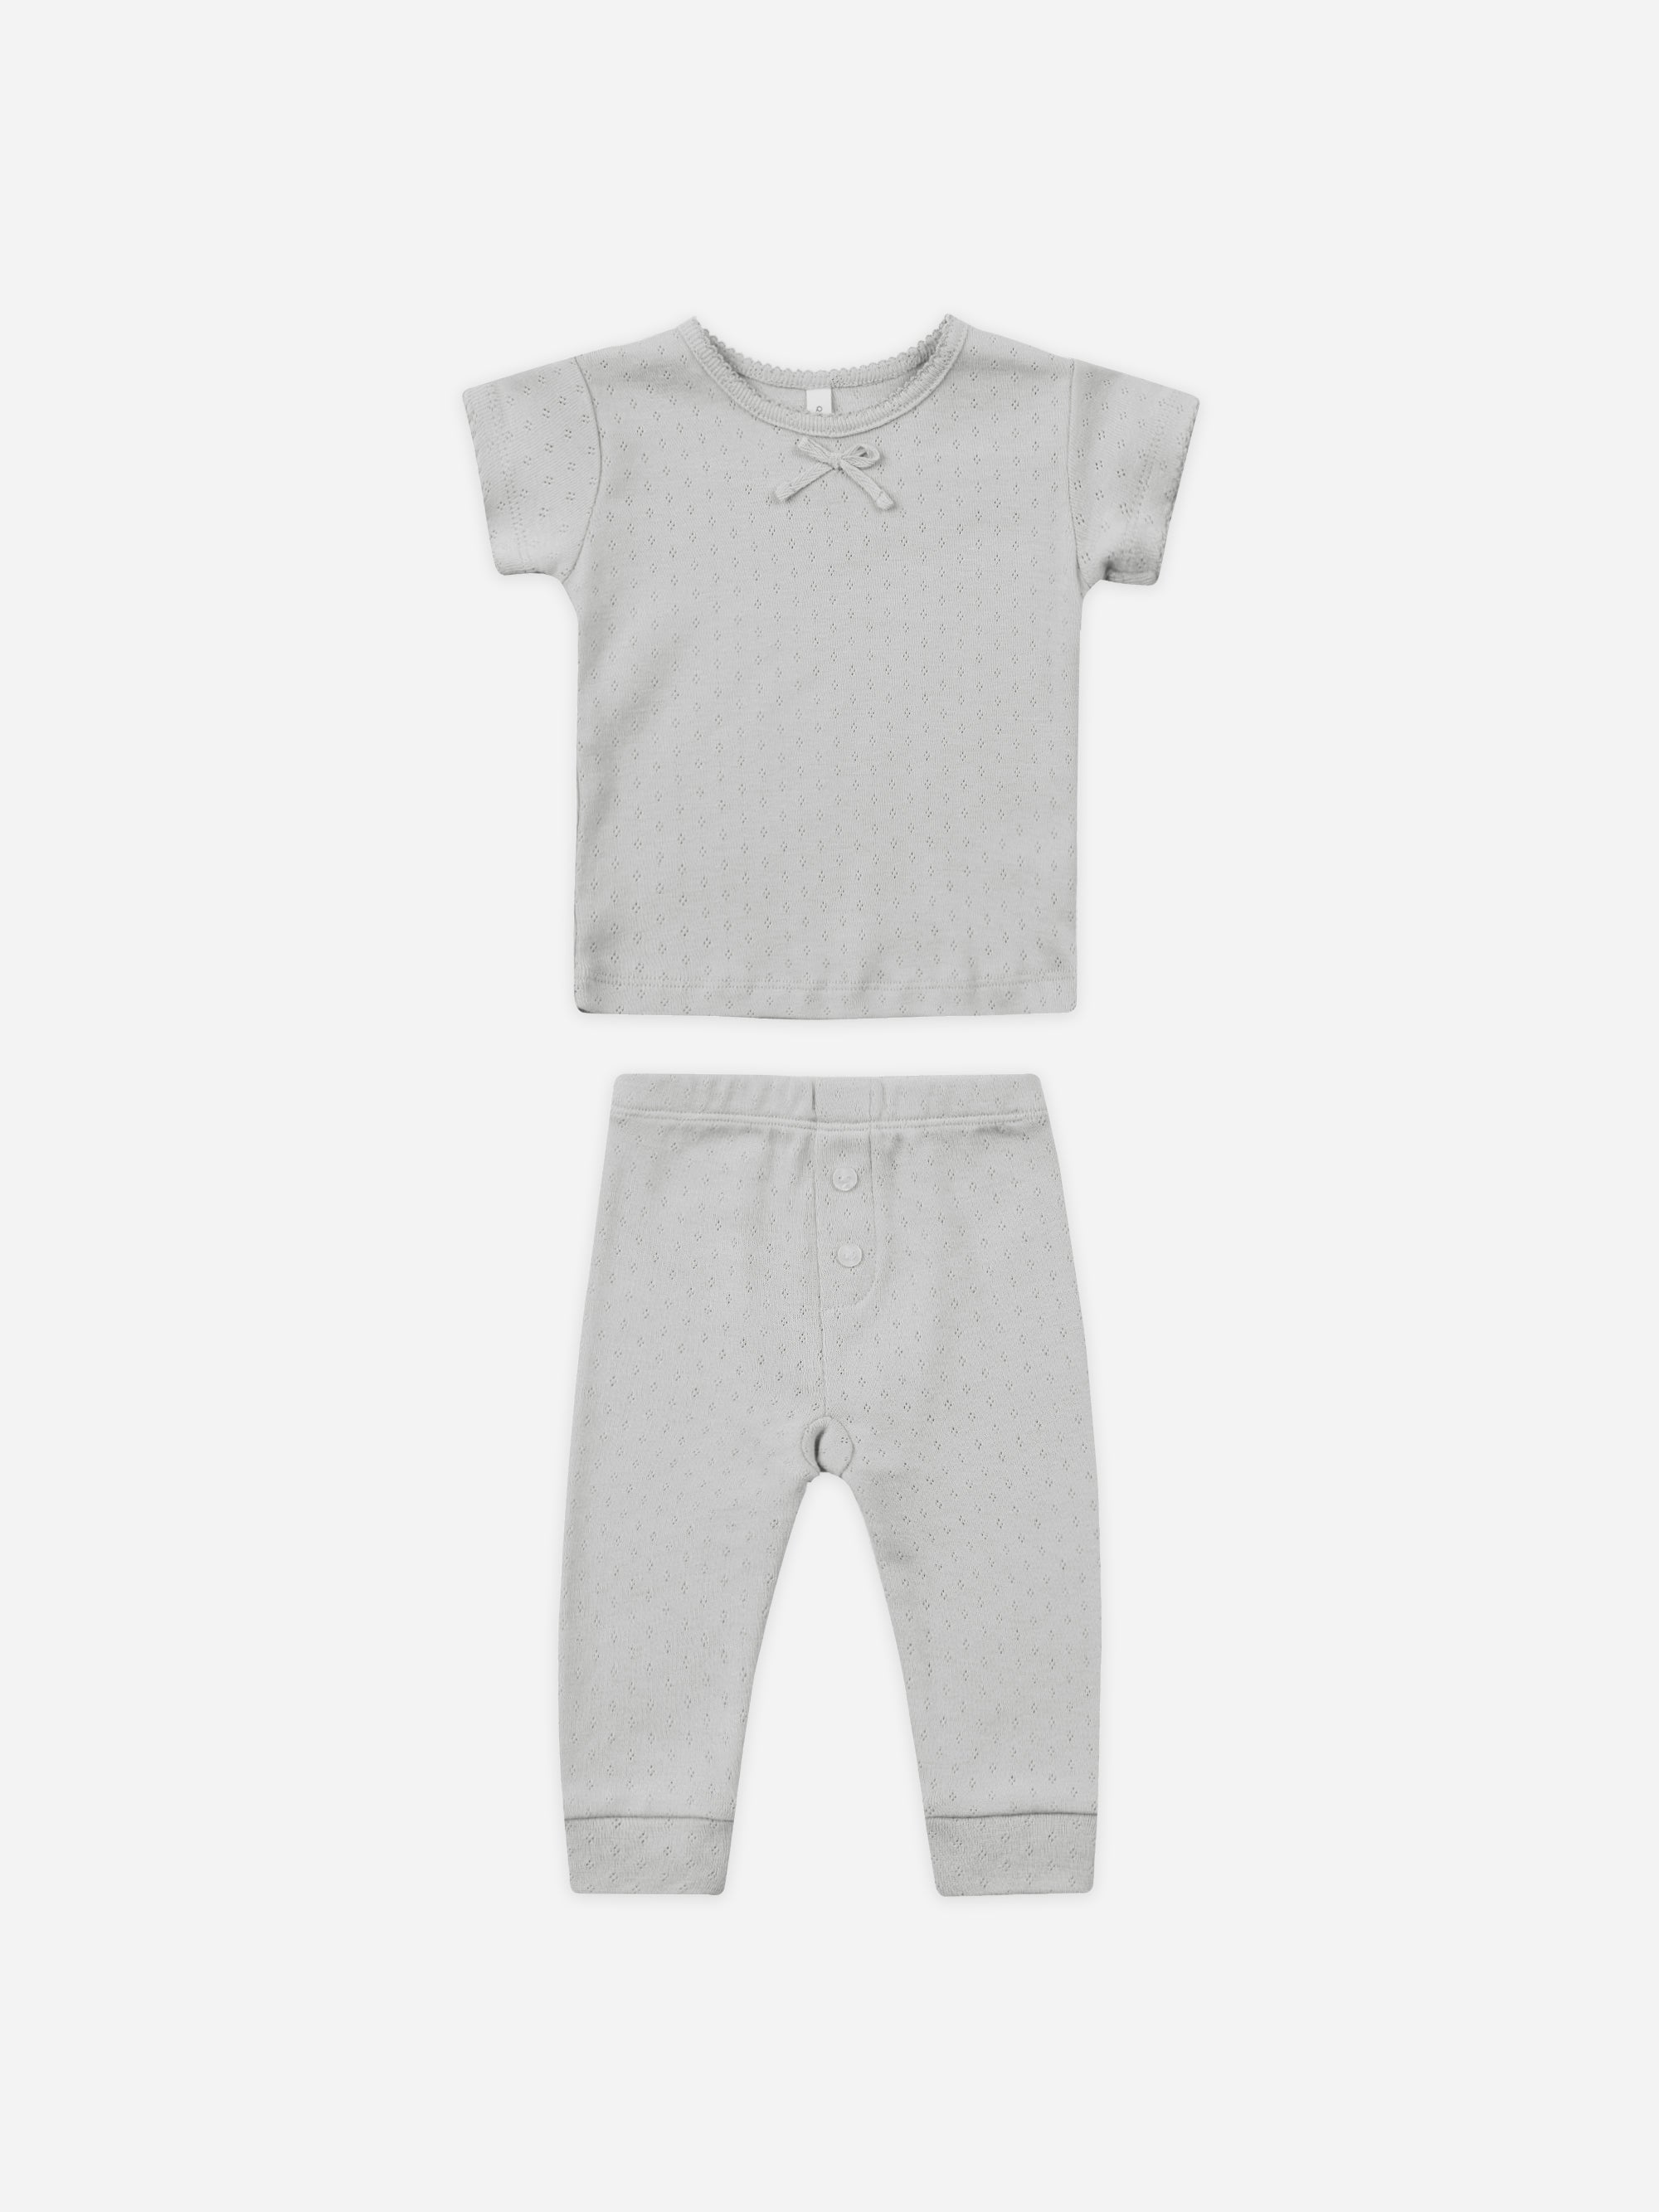 Pointelle Tee + Legging || Cloud - Rylee + Cru | Kids Clothes | Trendy Baby Clothes | Modern Infant Outfits |